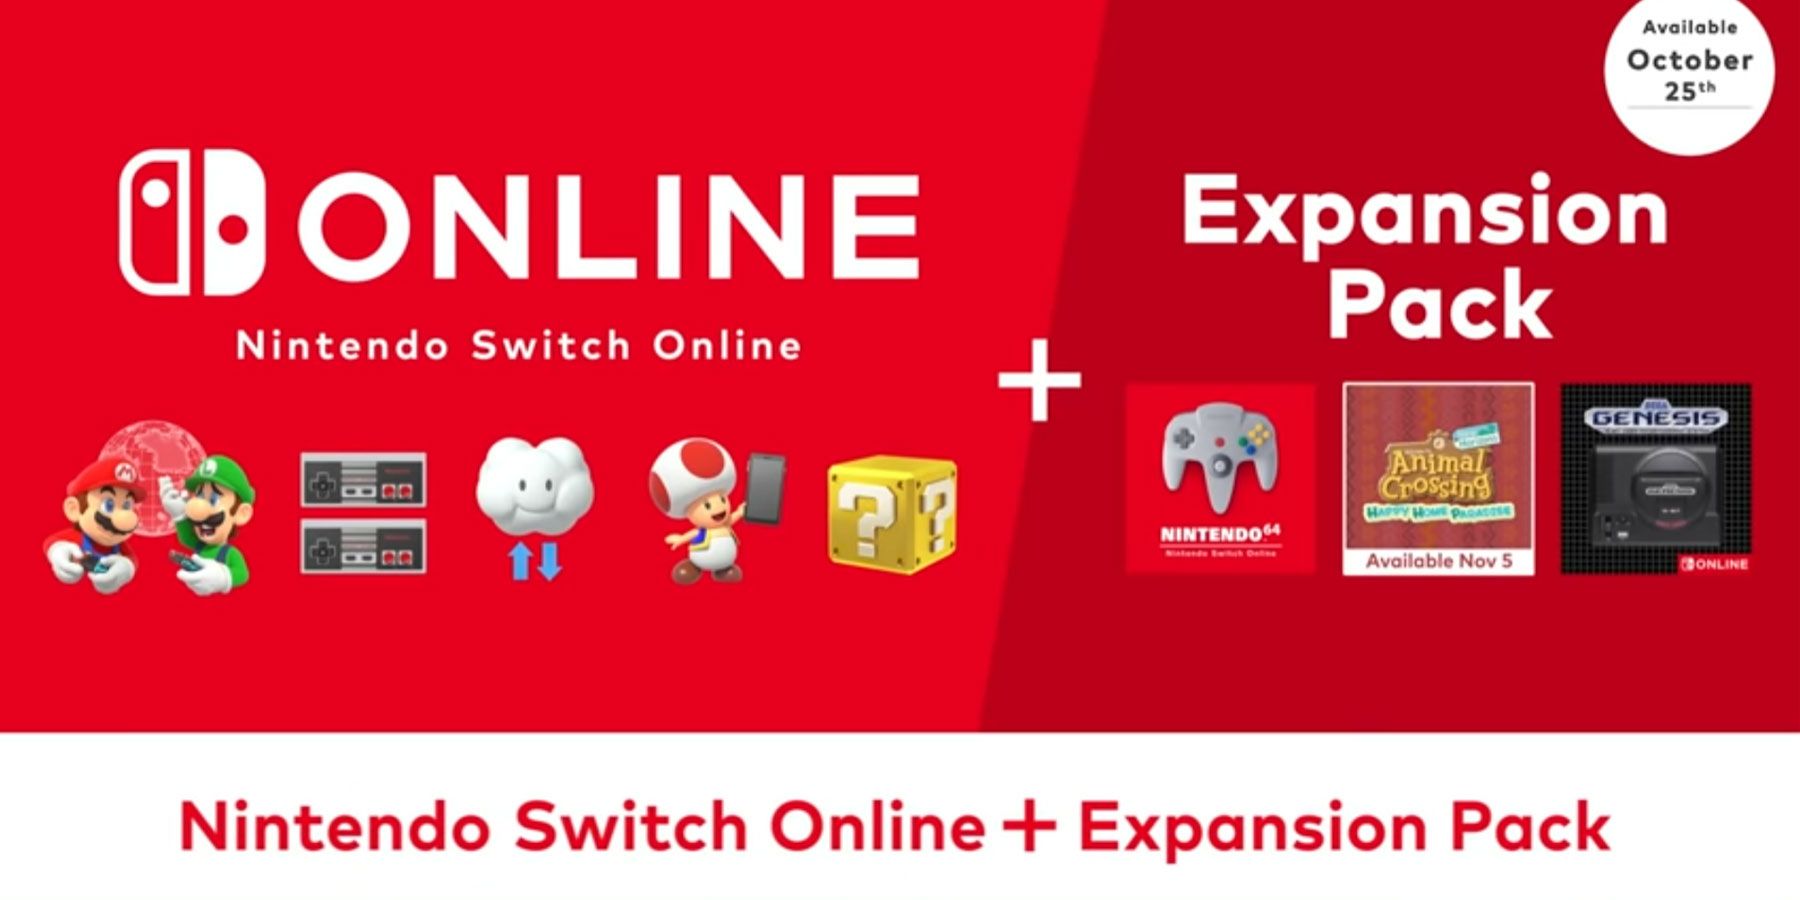 nintendo-switch-online-plus-expansion-pack-animal-crossing-new-horizons